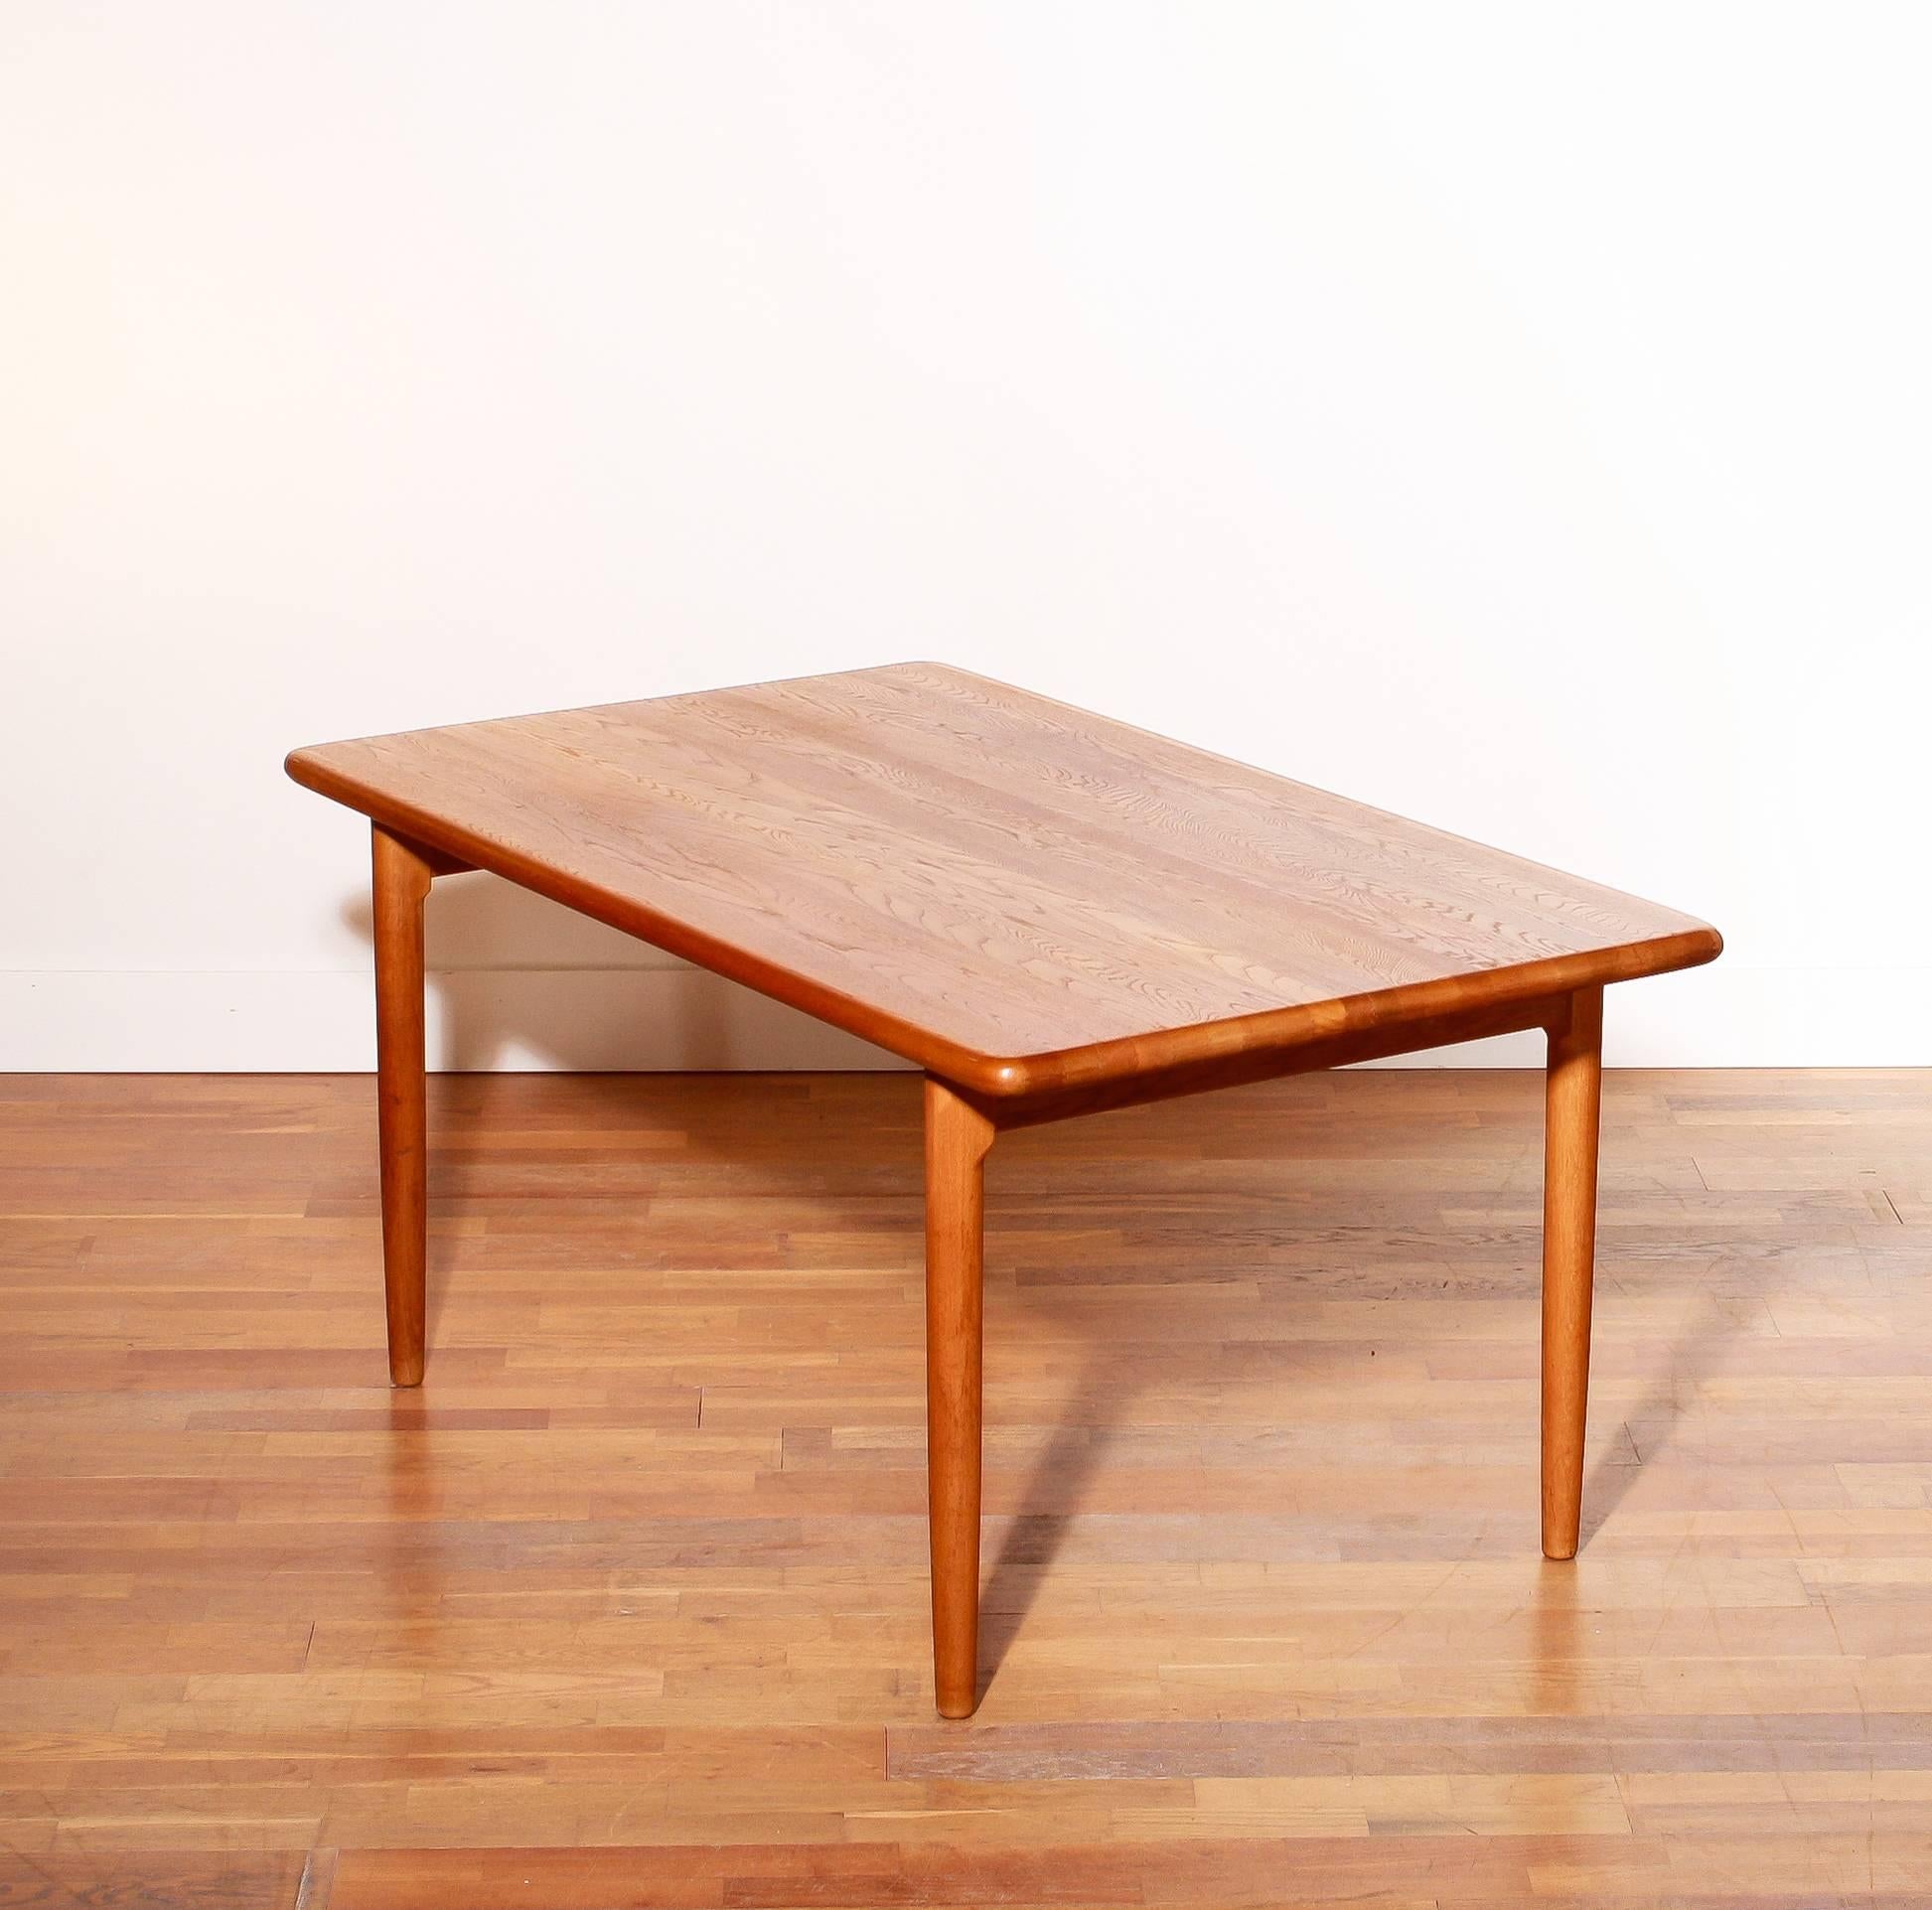 Beautiful oak table designed by Niels Otto Møller and made by JL Møller Møbelfabrik, Denmark.
This table is in an excellent condition. 
The very simplicity makes the table beautiful.
Period 1954. 
The dimensions are D 90 cm, W 149 cm, H 73 cm.